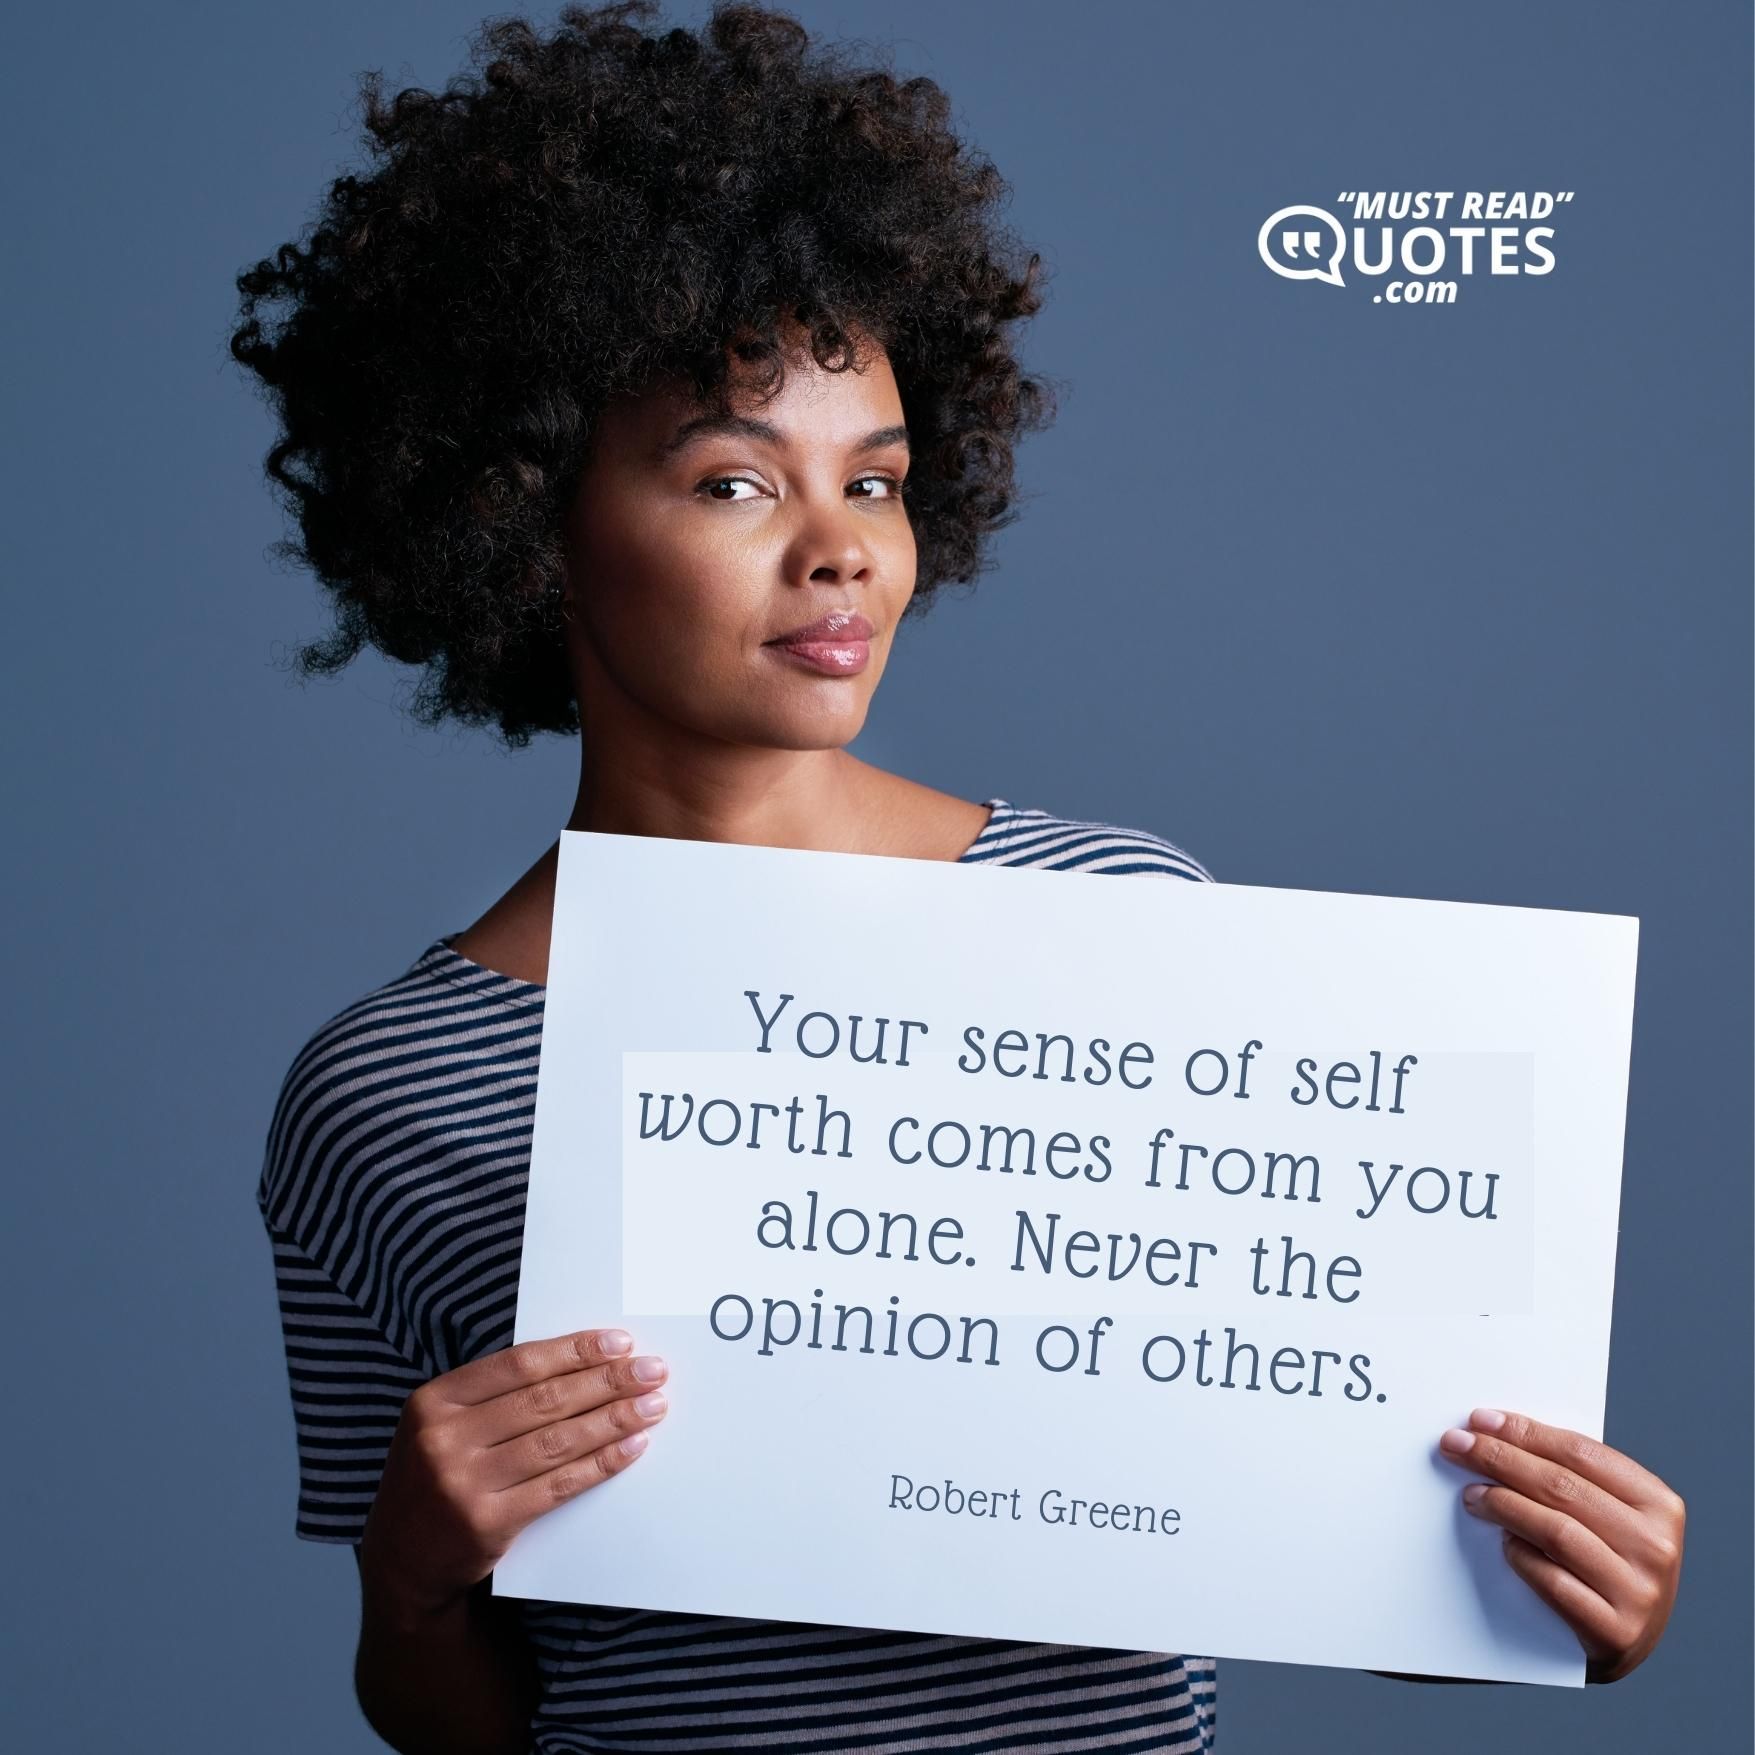 Your sense of self worth comes from you alone. Never the opinion of others.